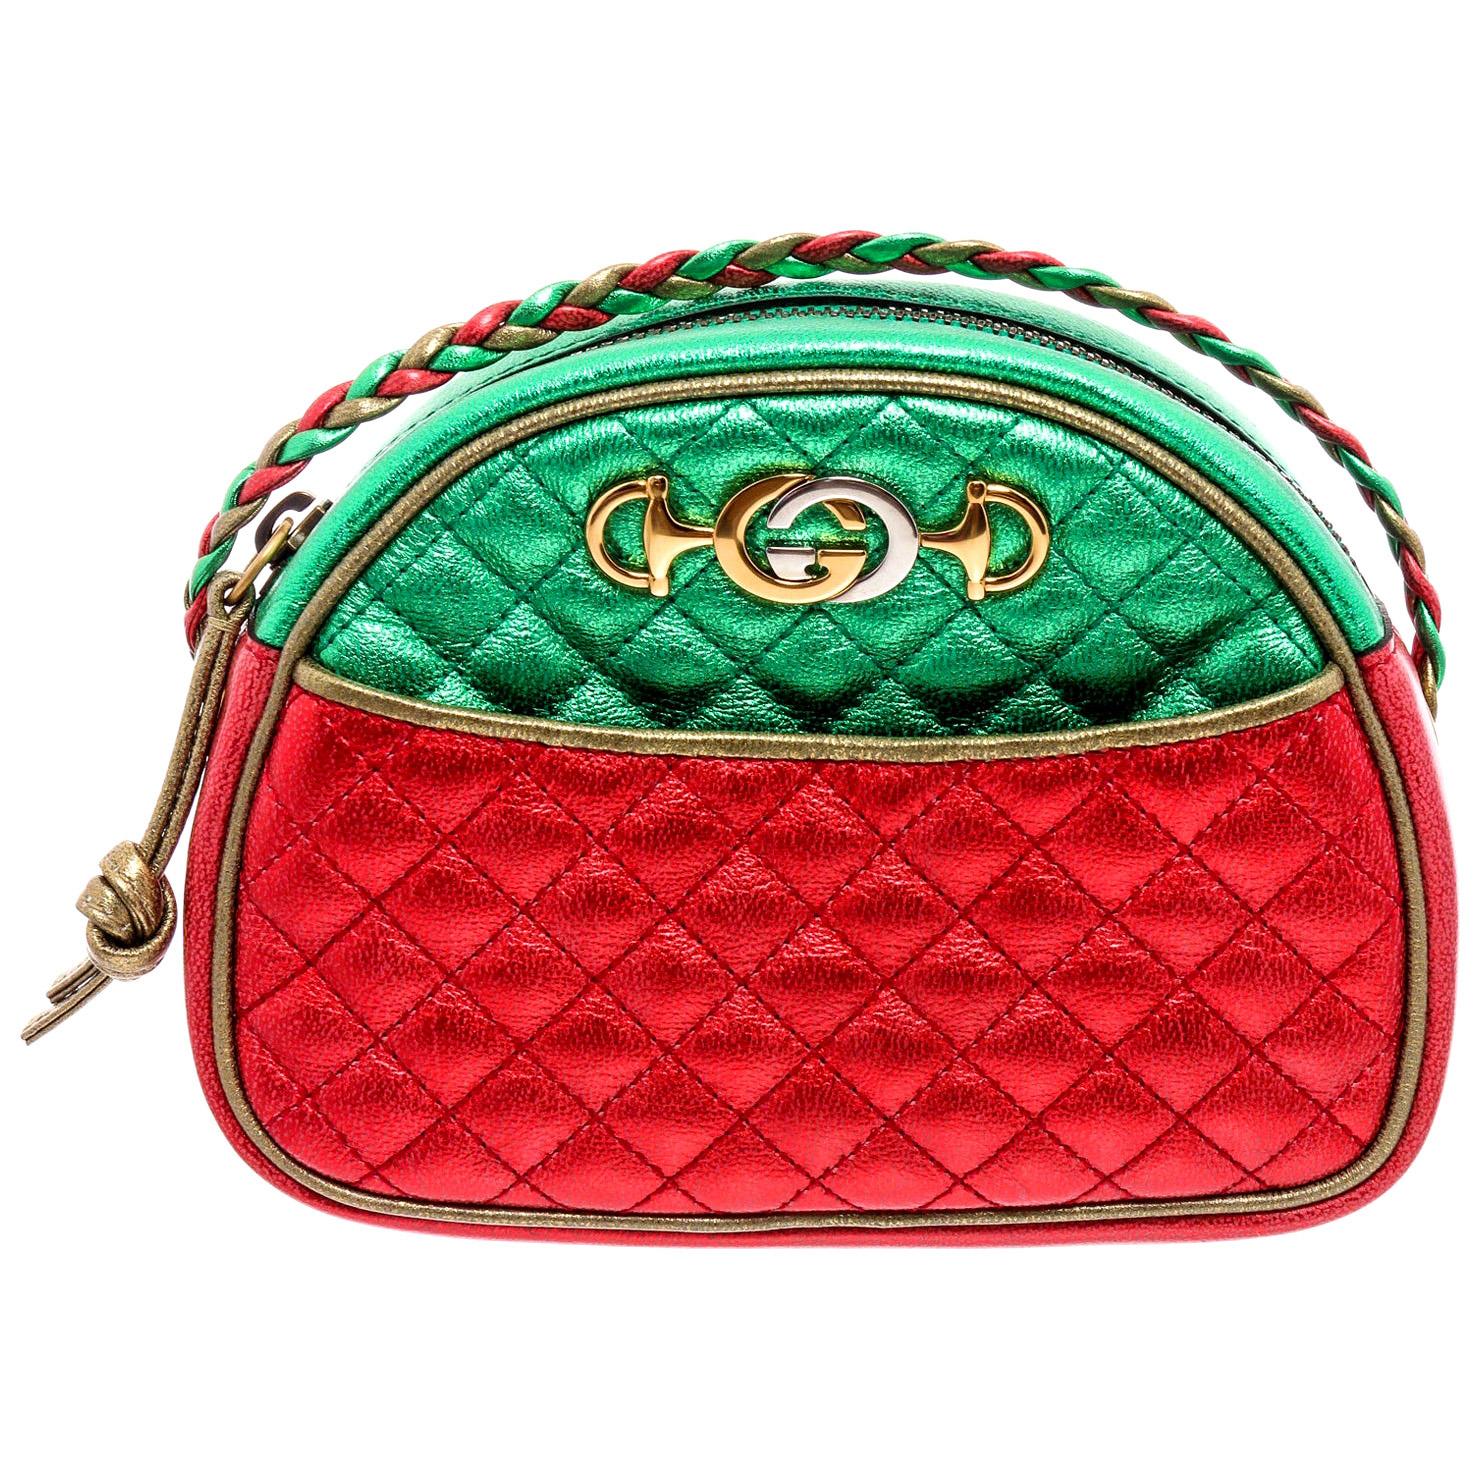 Gucci Red and Green Metallic Calfskin Mini Trapuntata Dome Shoulder Bag Gold and Silver Hardware